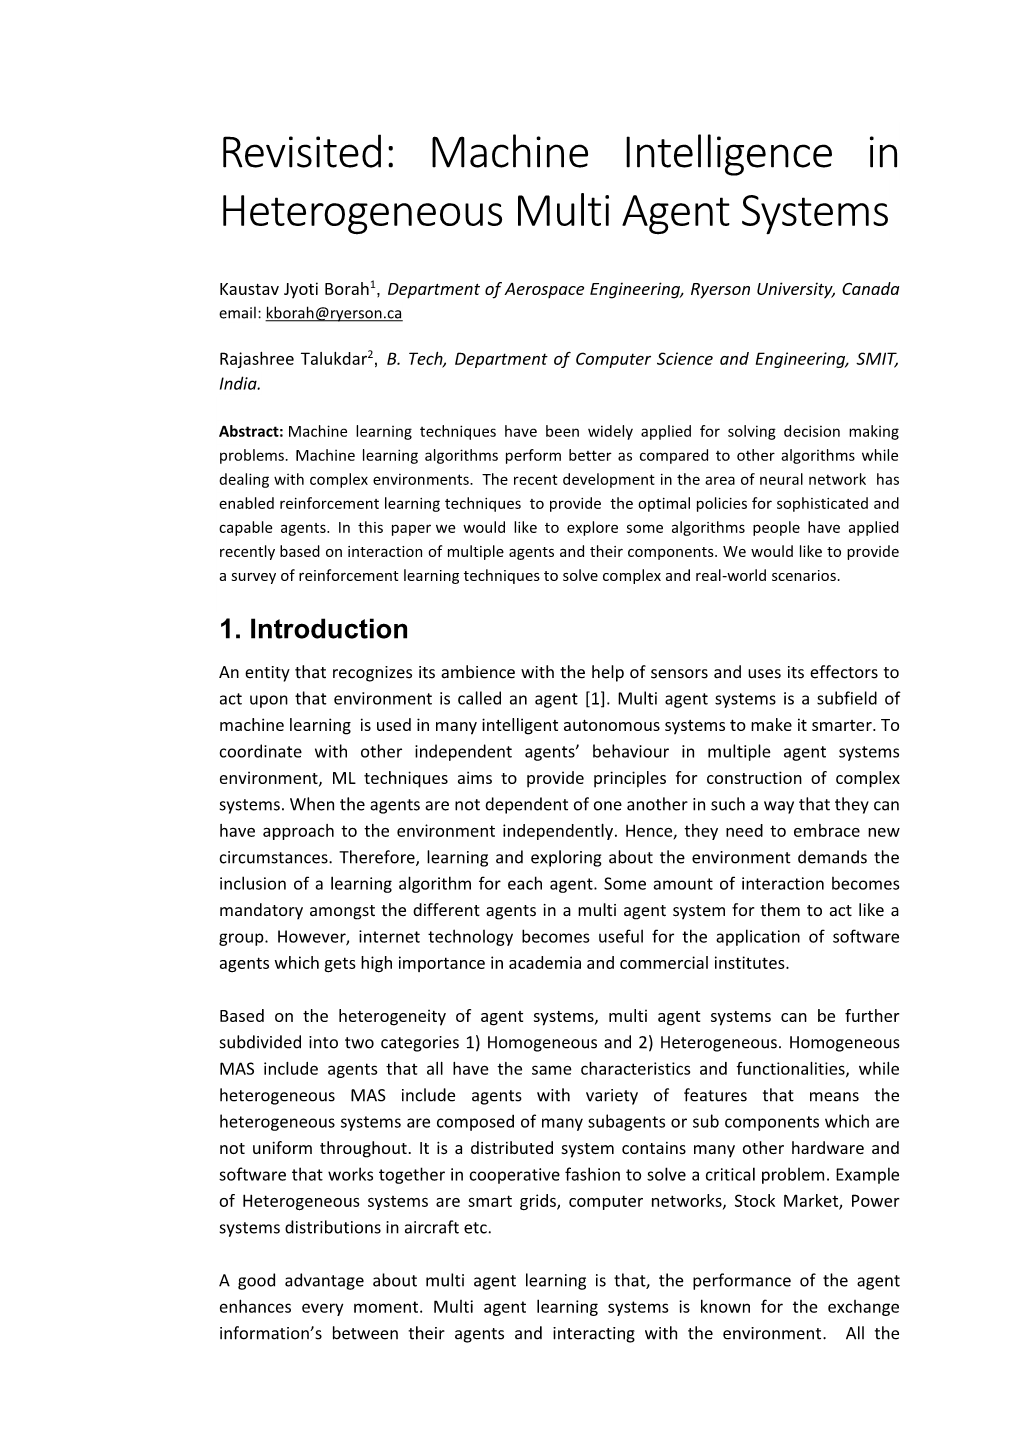 Revisited: Machine Intelligence in Heterogeneous Multi Agent Systems